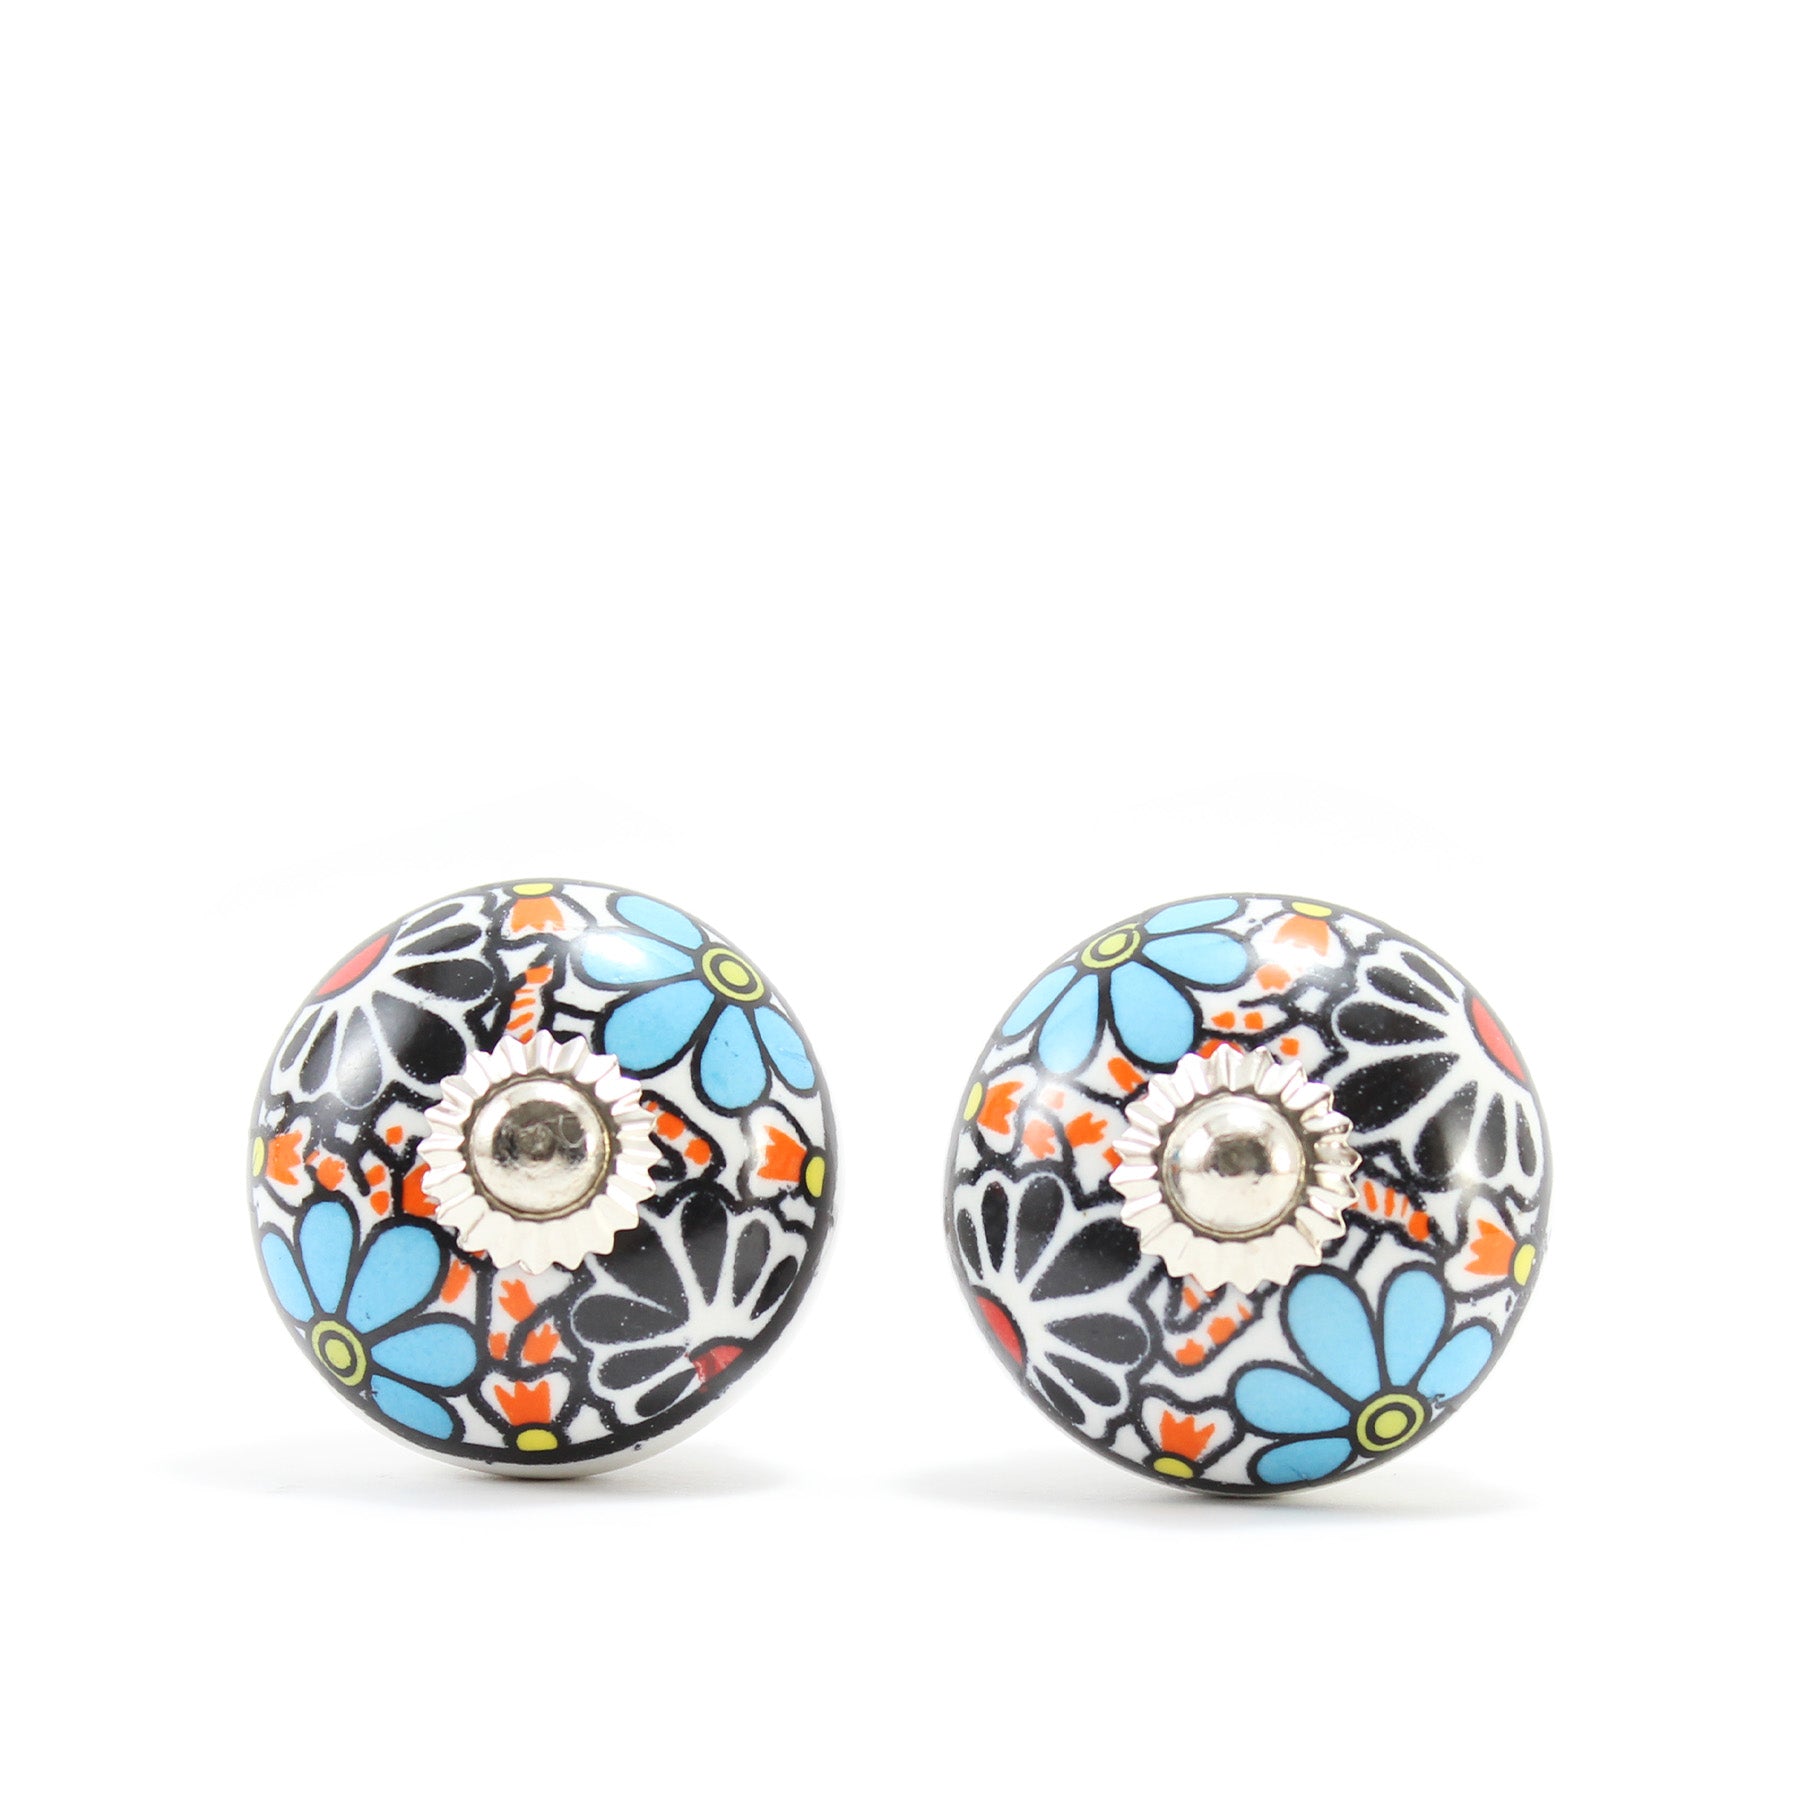 Handcrafted Ceramic Knobs II